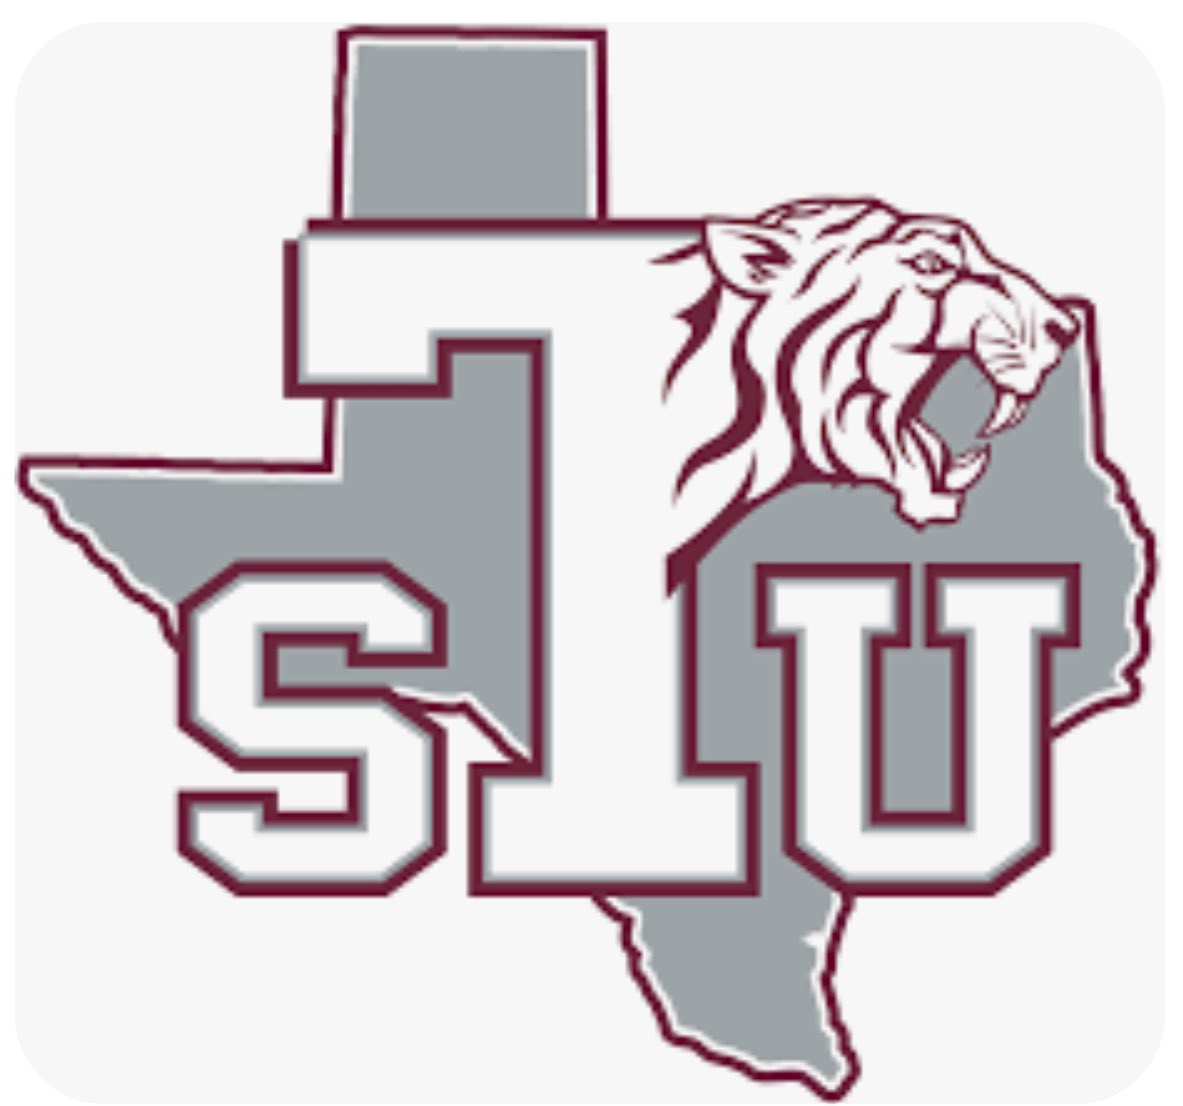 Blessed to receive an offer from Texas Southern University!! @KickingDynamics @ThePuntFactory @JUCOFFrenzy @mtsacfootball